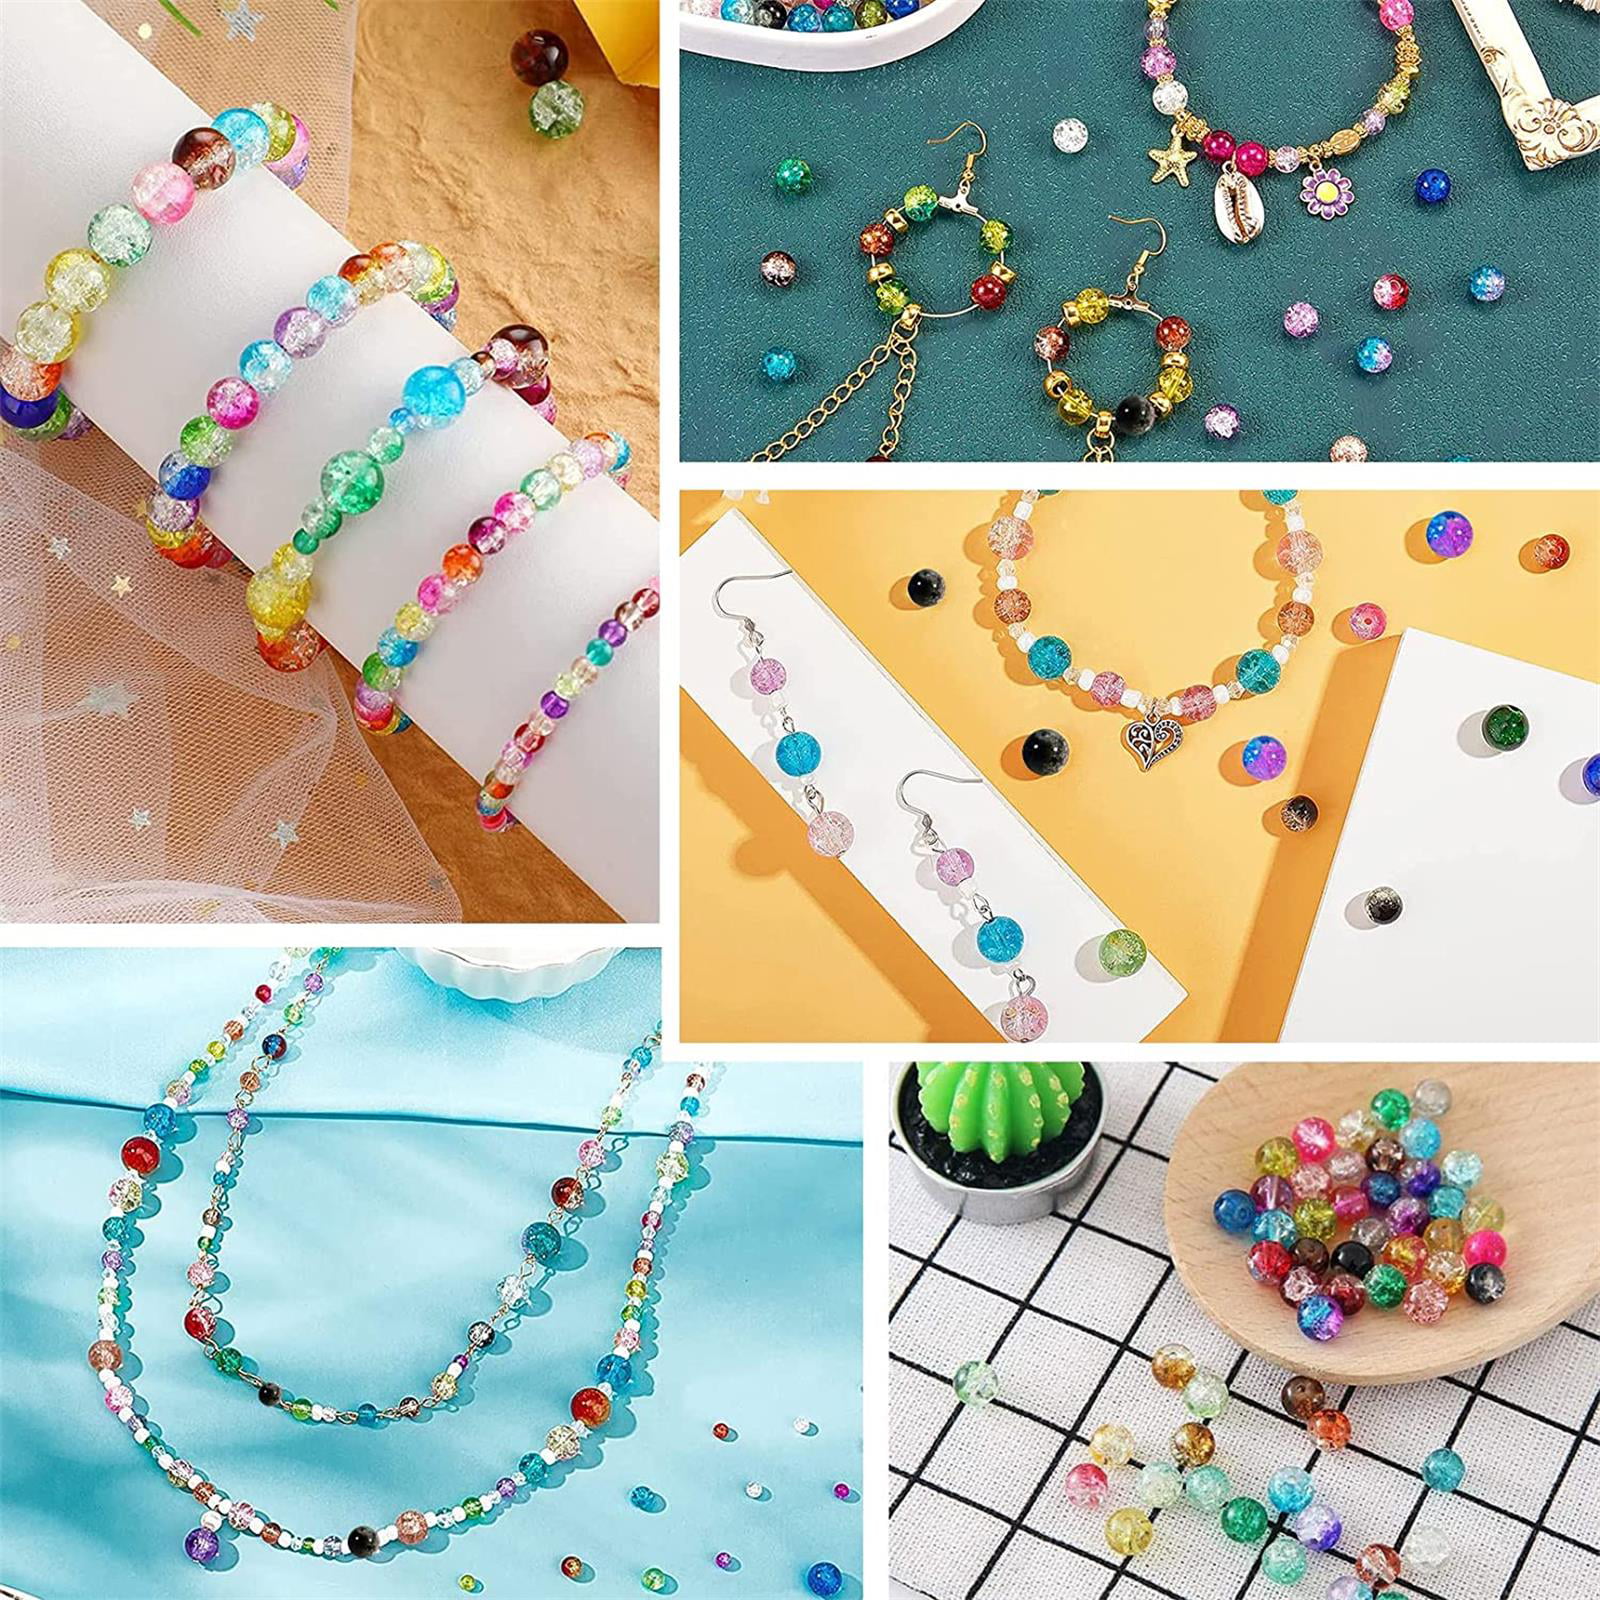 1050pcs Crystal Glass Rondelle Beads, Finding Spacer Beads Faceted Shape Assorted Beads with Container Box, Multi-Color Clear Crystal Beads with Hole